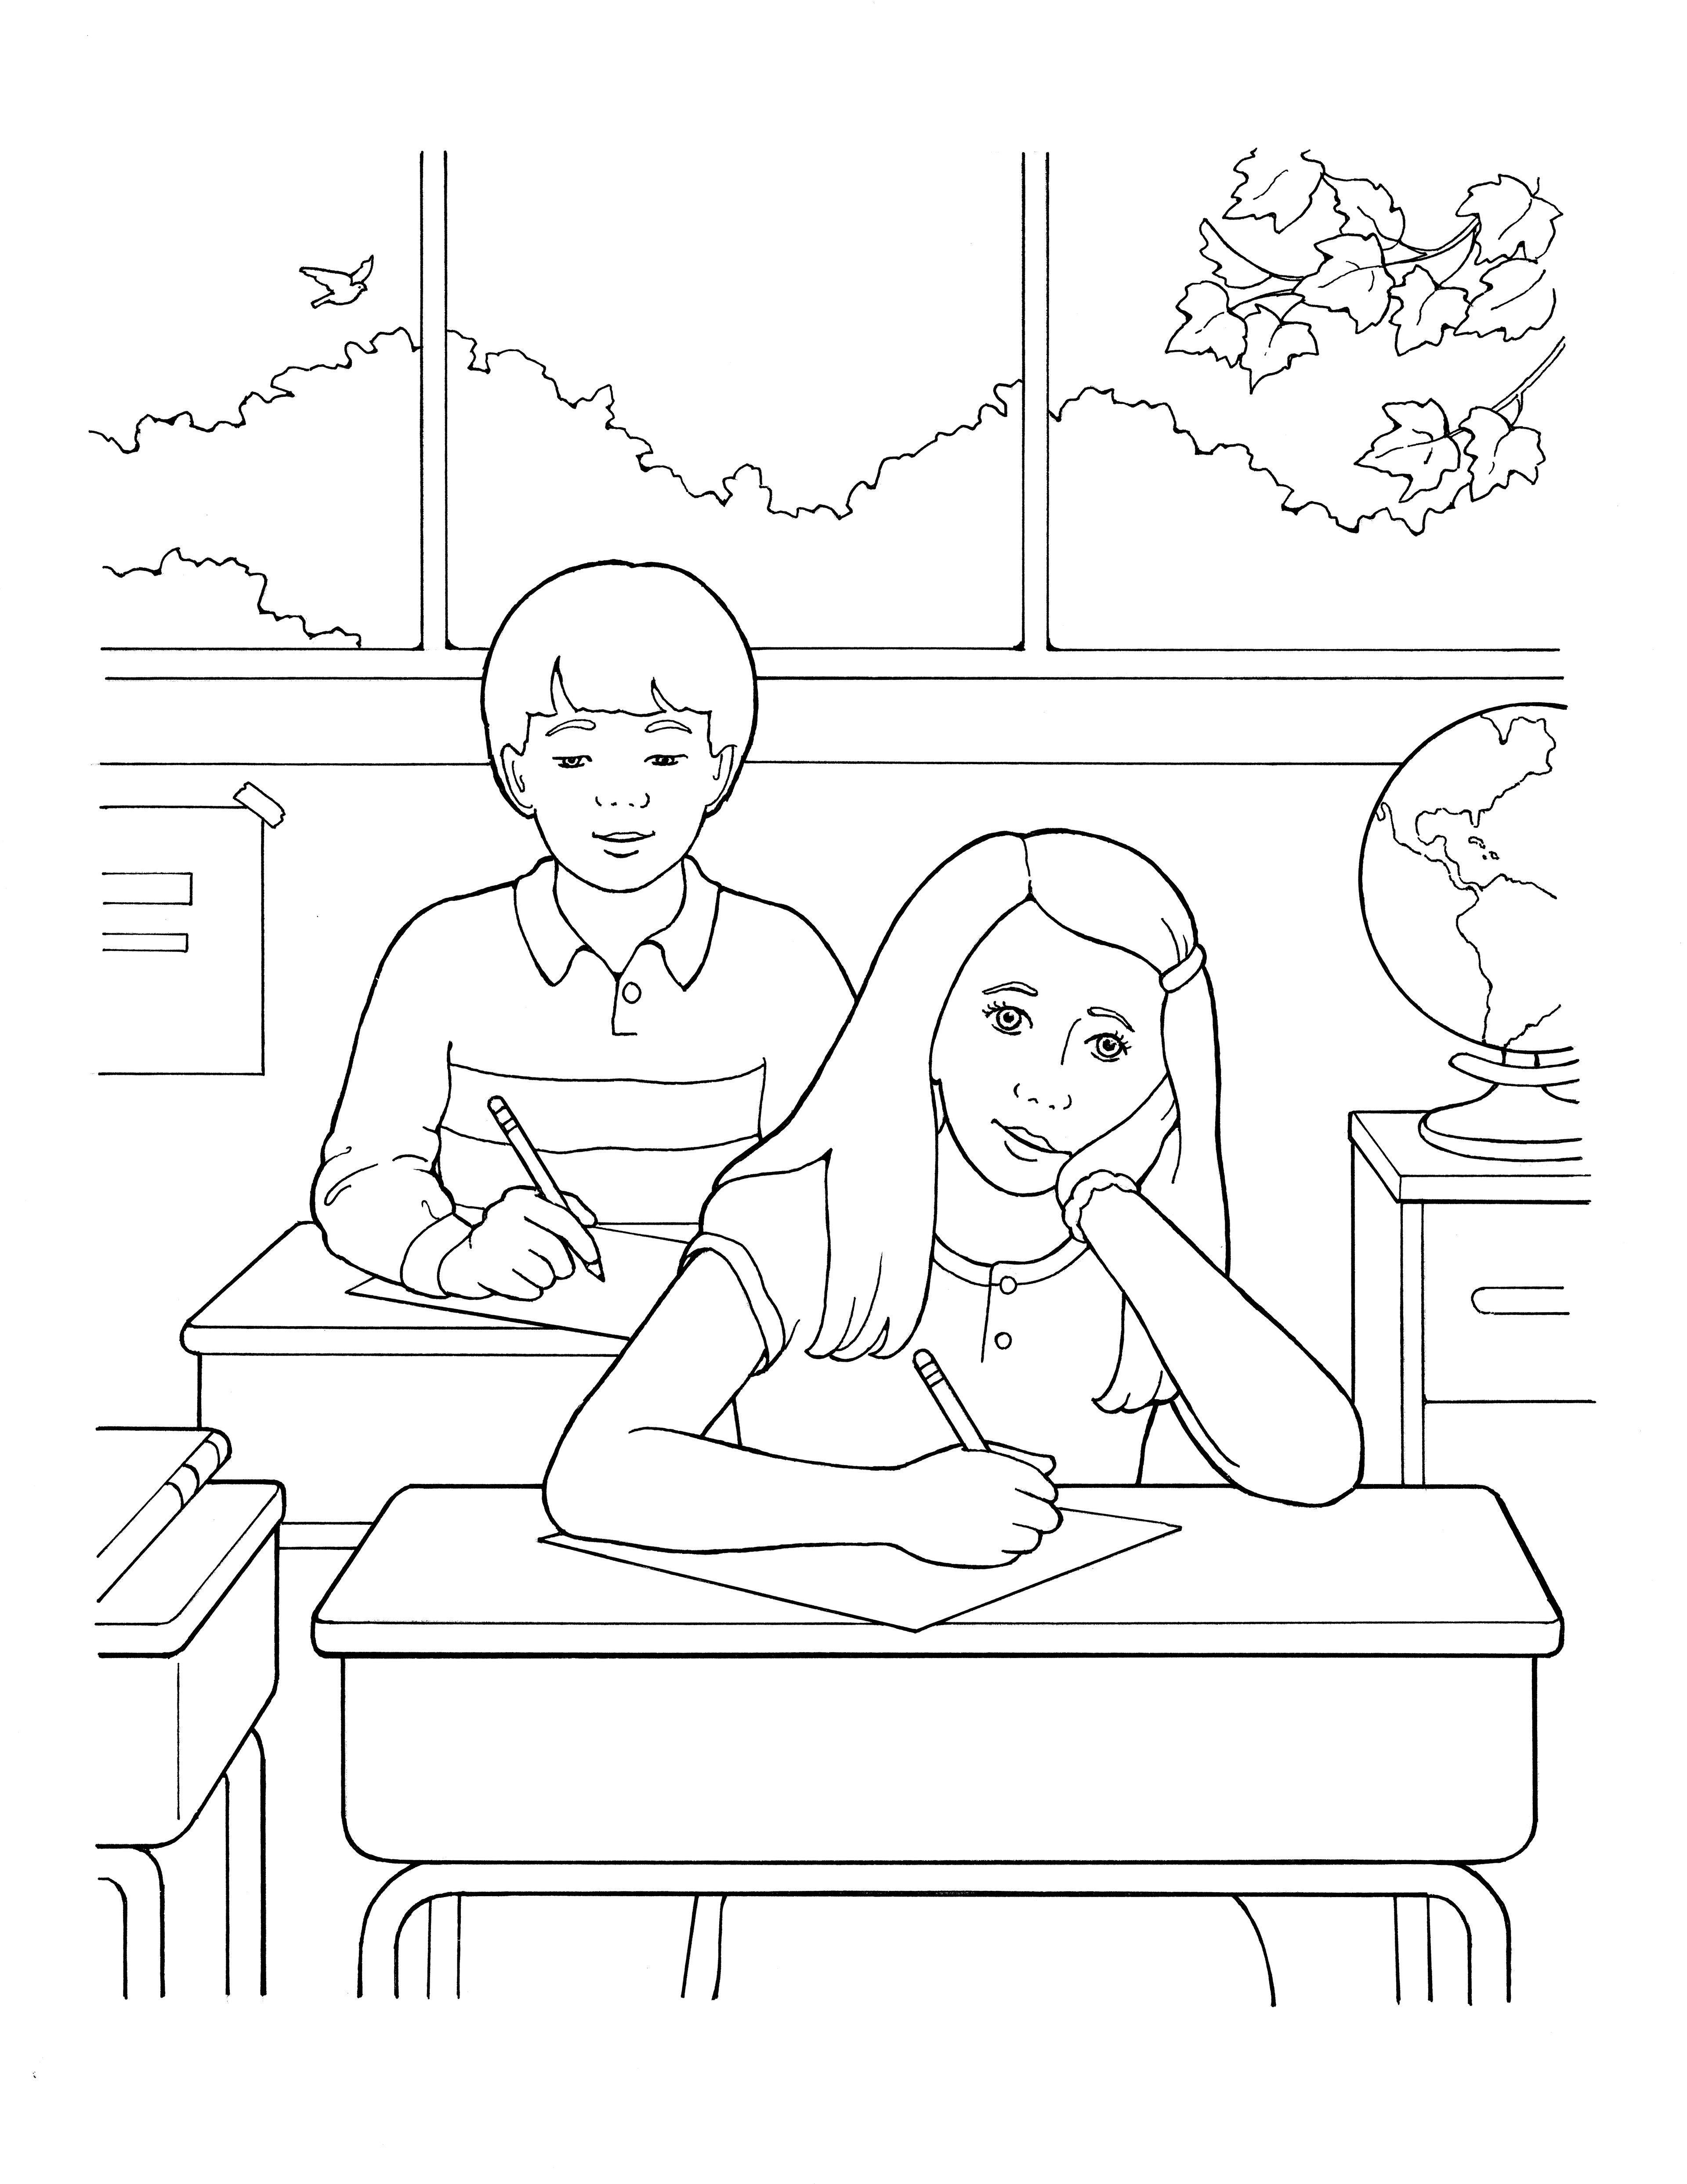 An illustration of children writing at school.